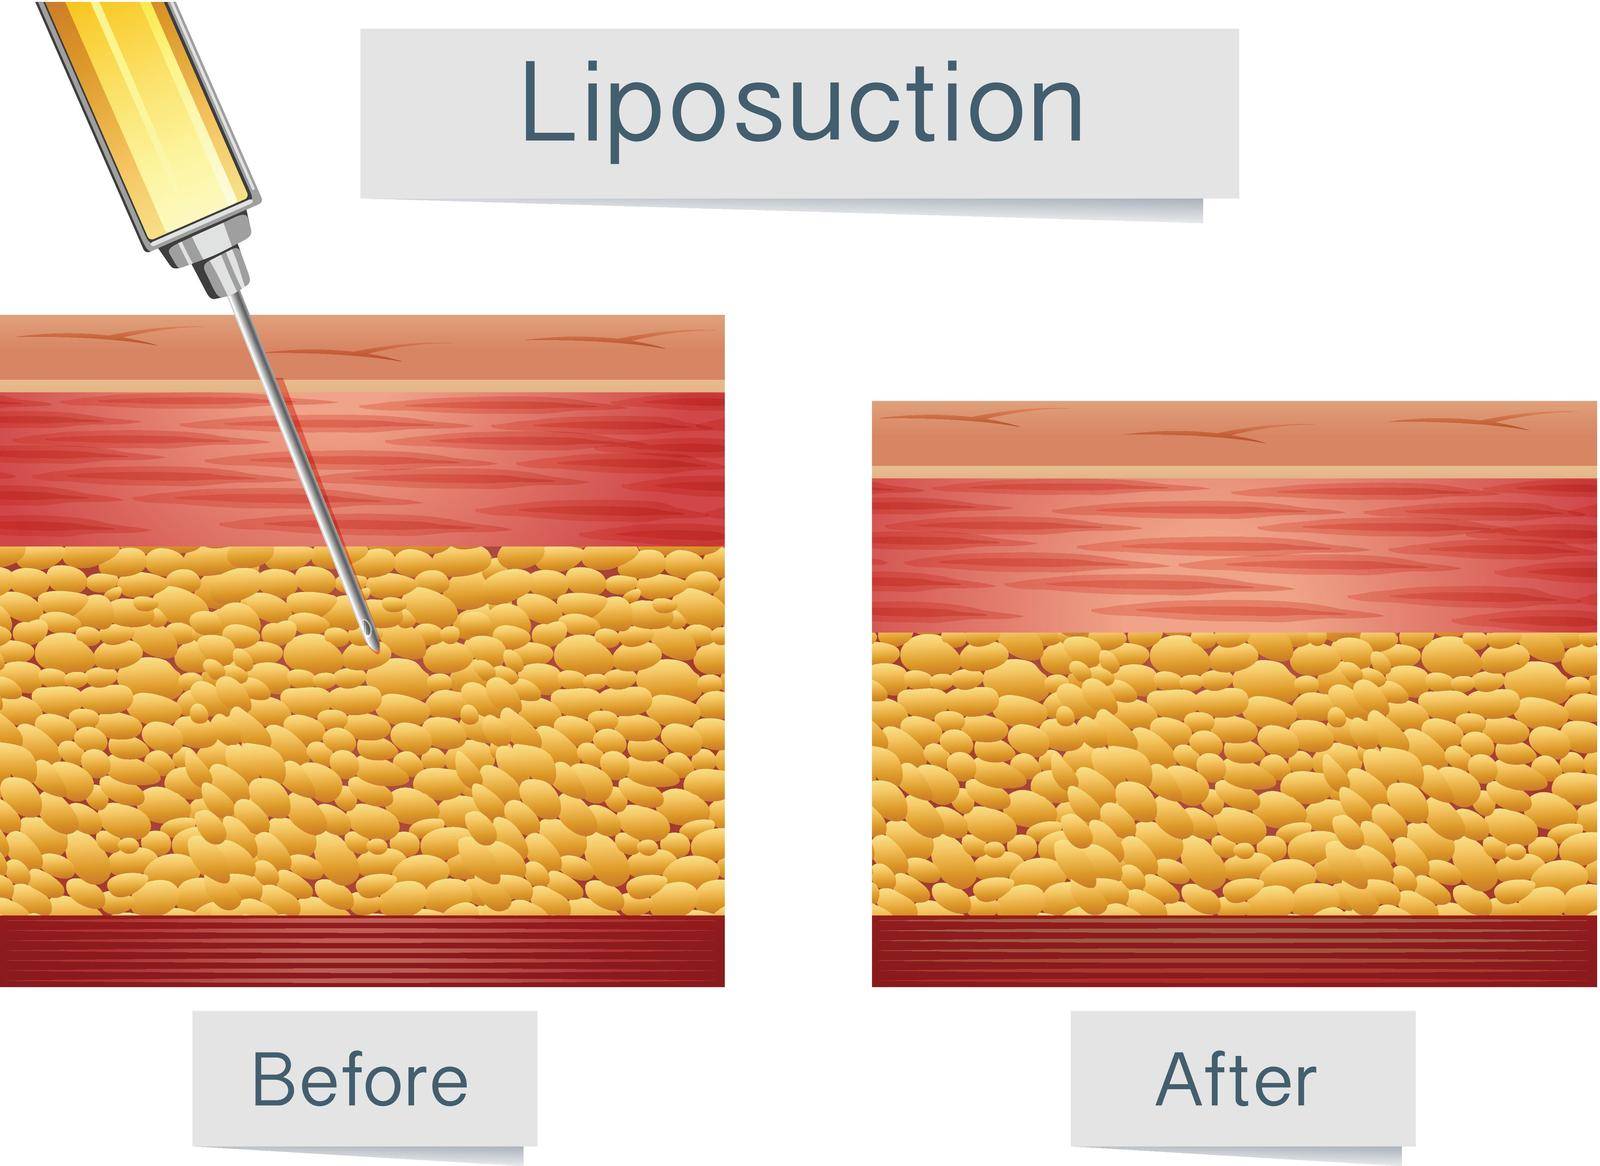 Liposuction Medical Treatment and Comparison by iimages